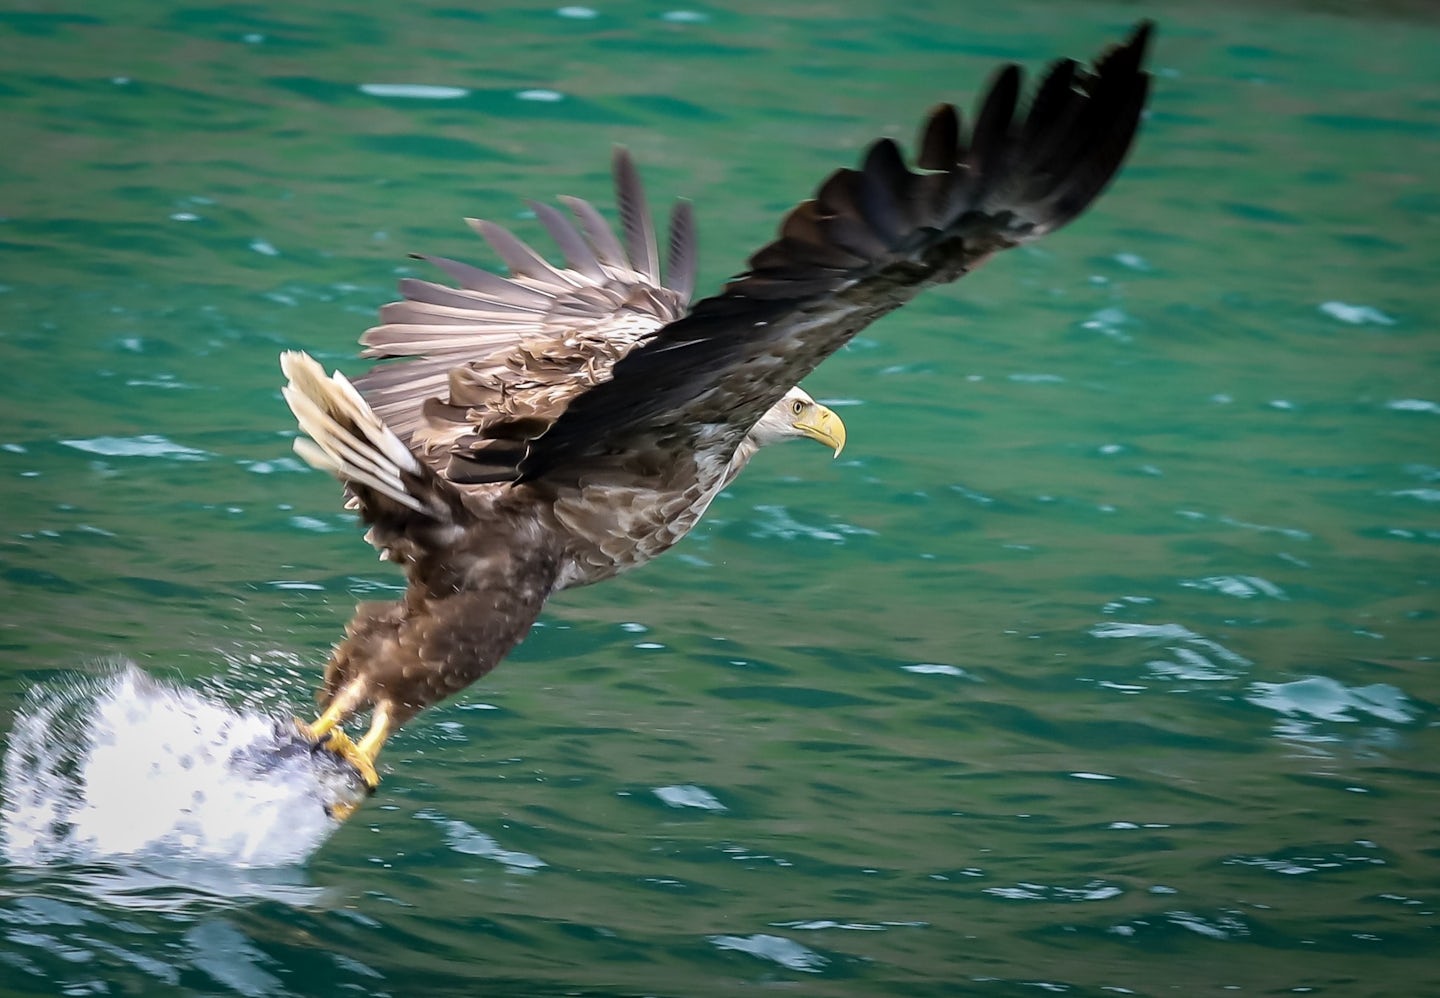 Sea eagle coming down for a fish! This was our rib boat excursion to find s